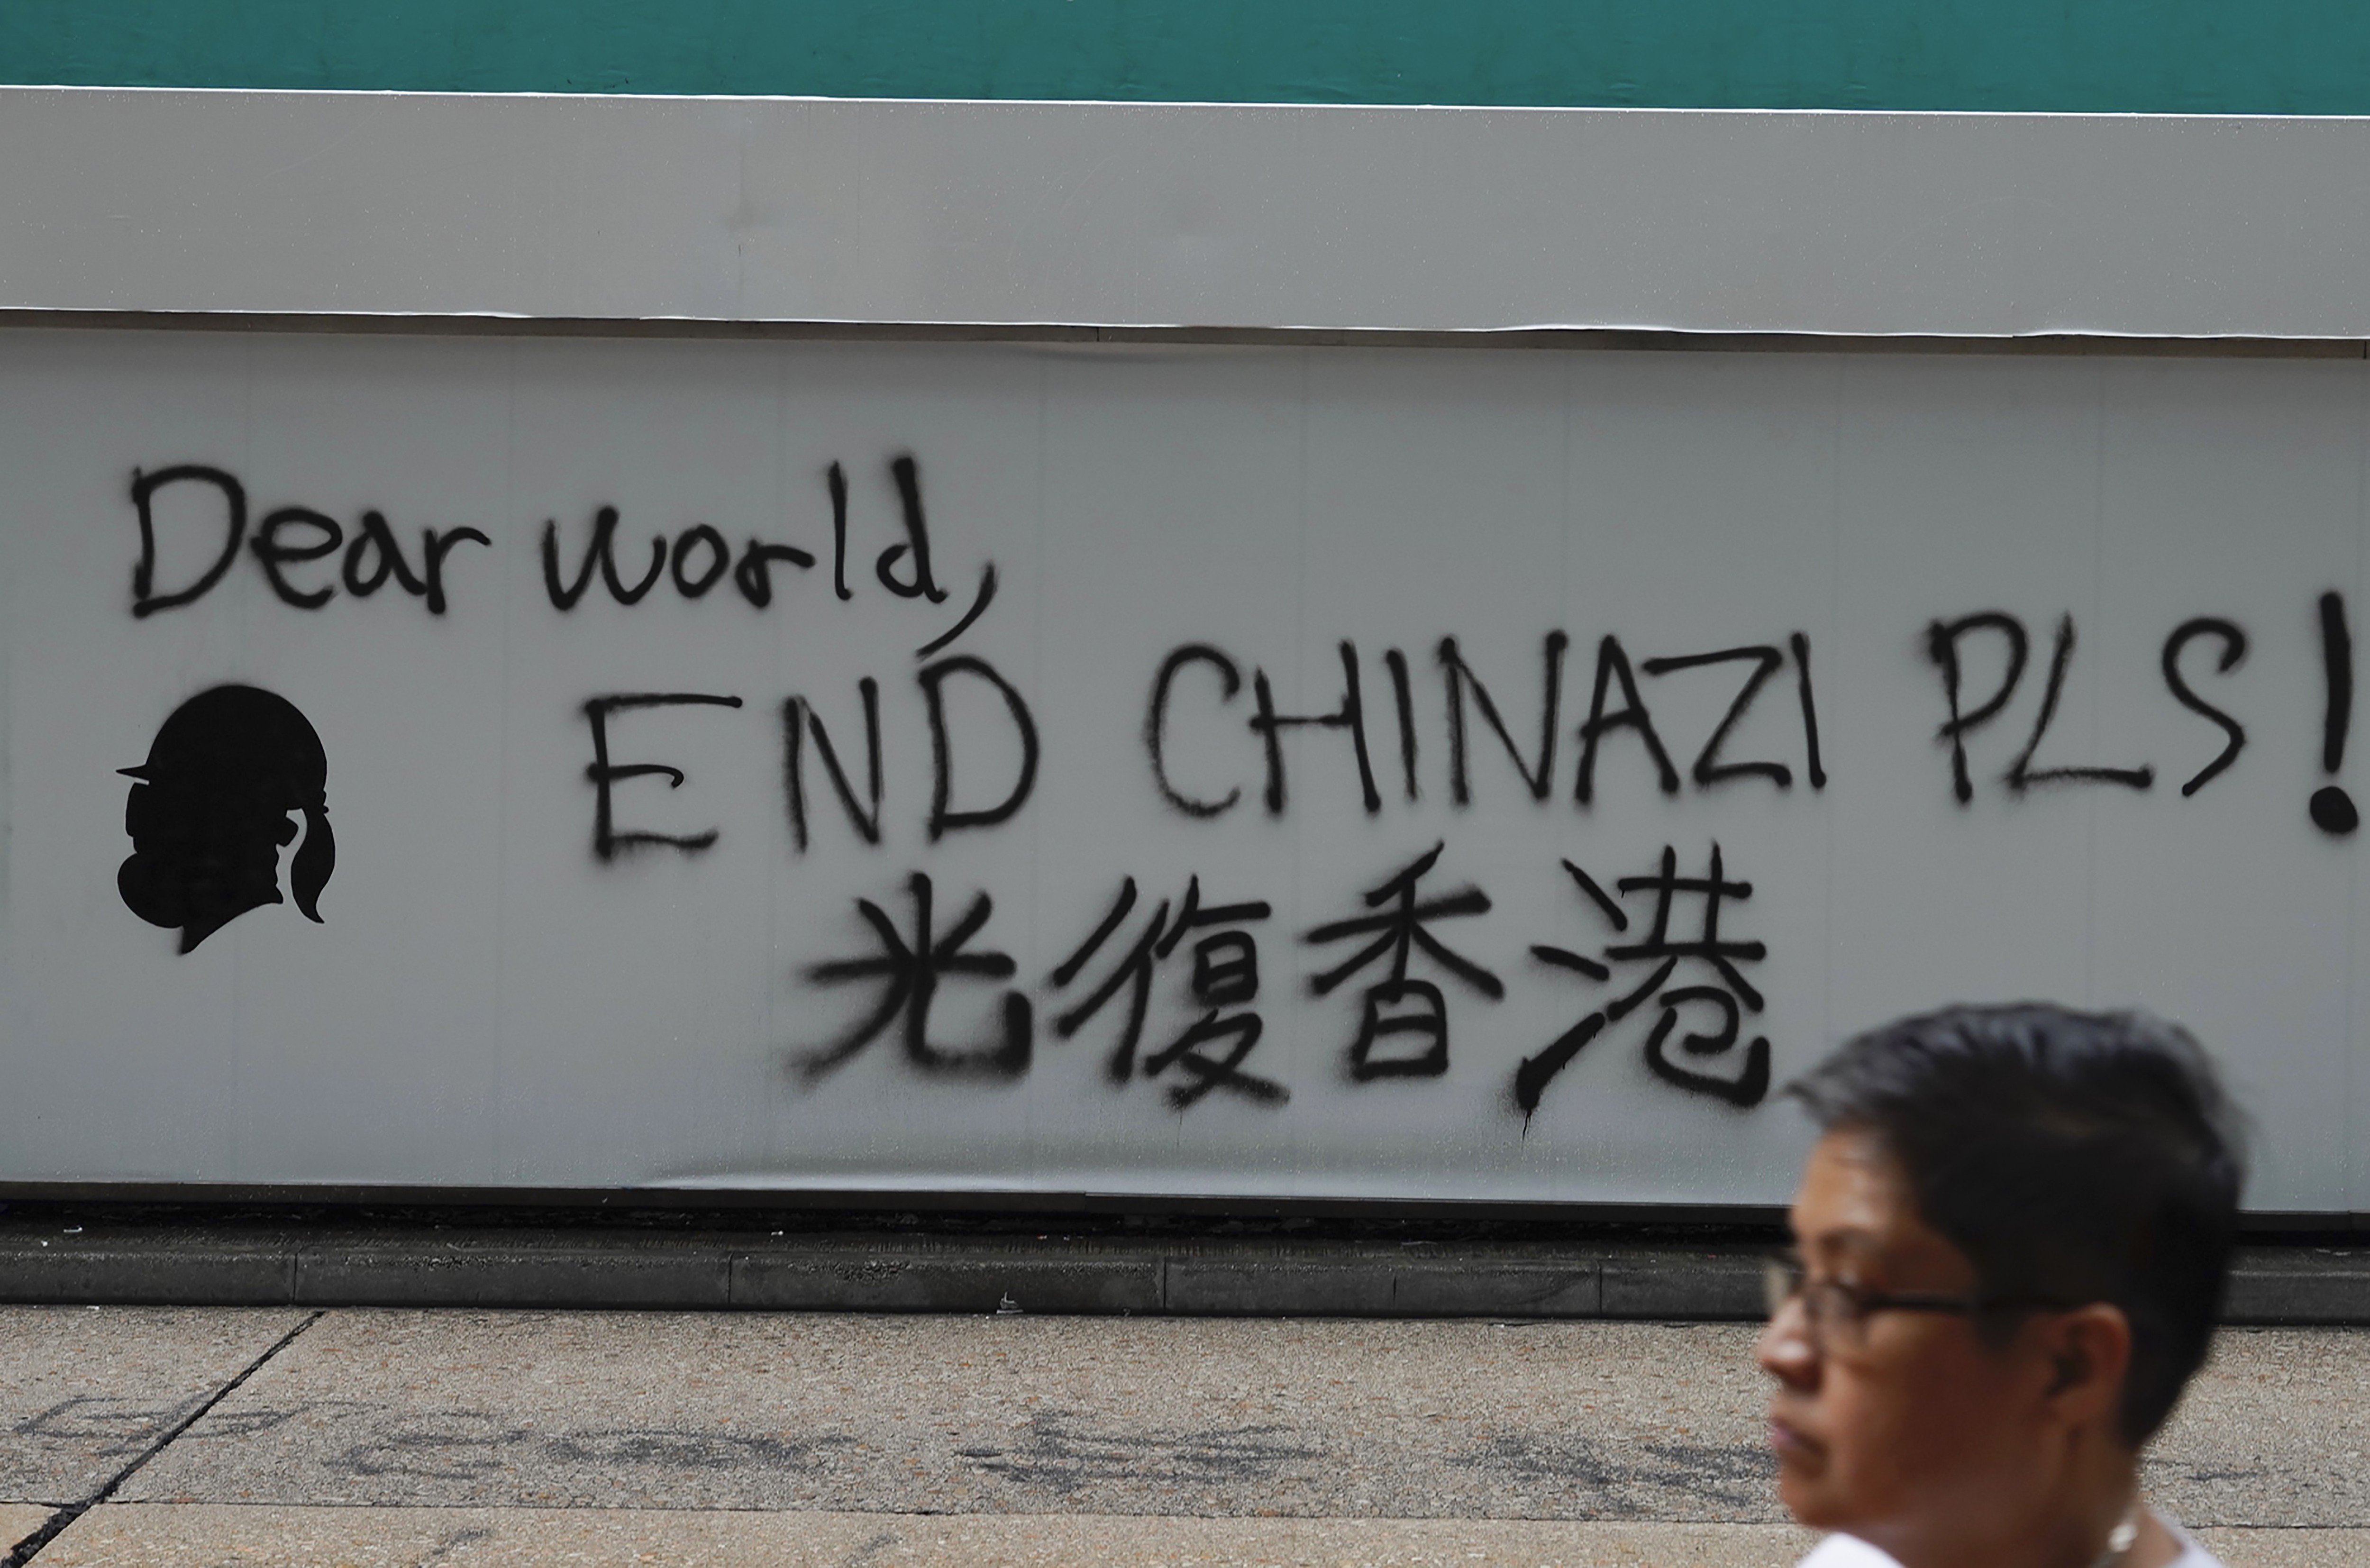 Memes containing slurs such as “Chinazi” are divisive and need to stop. The danger is that memes can provoke such fears and divisions that people start to act based on riled-up emotion rather than fact. Photo: AP